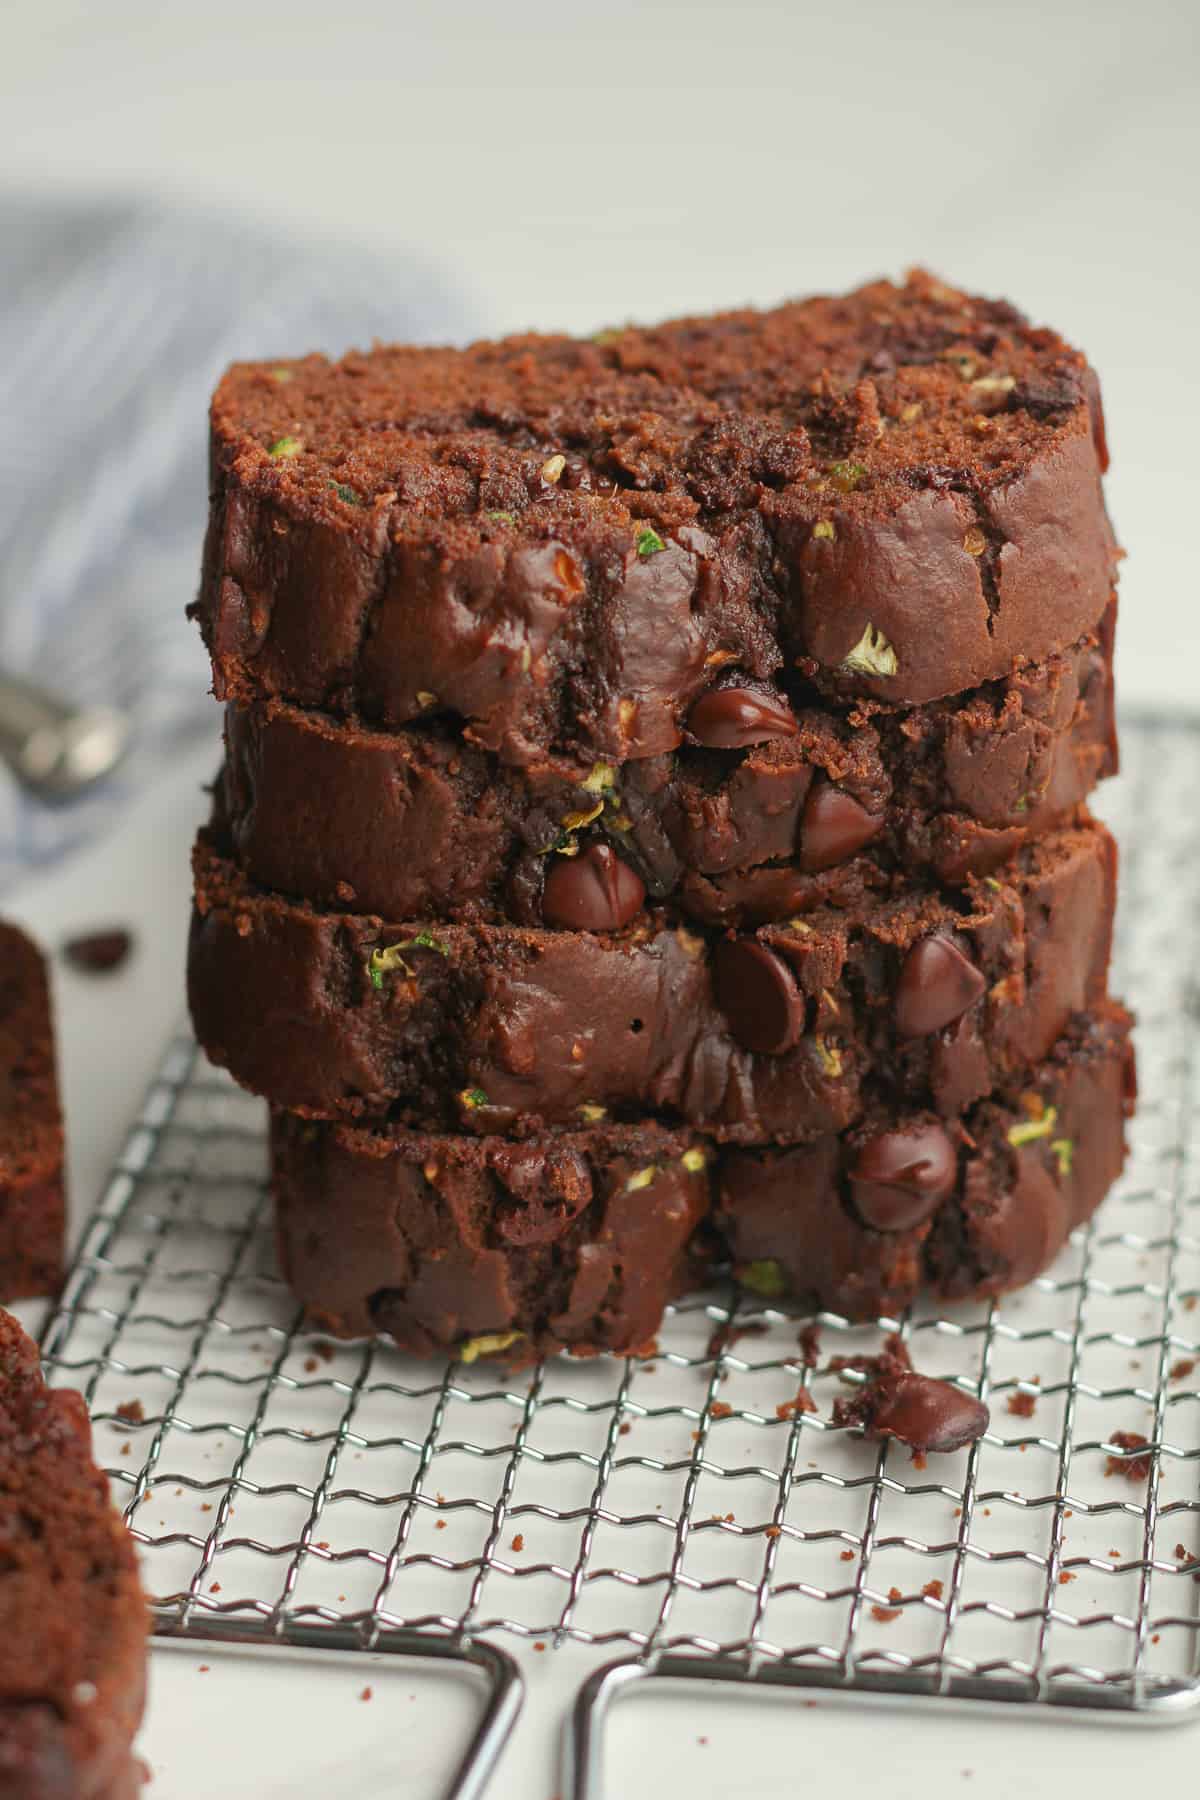 A stack of chocolate zucchini bread on a wire rack.